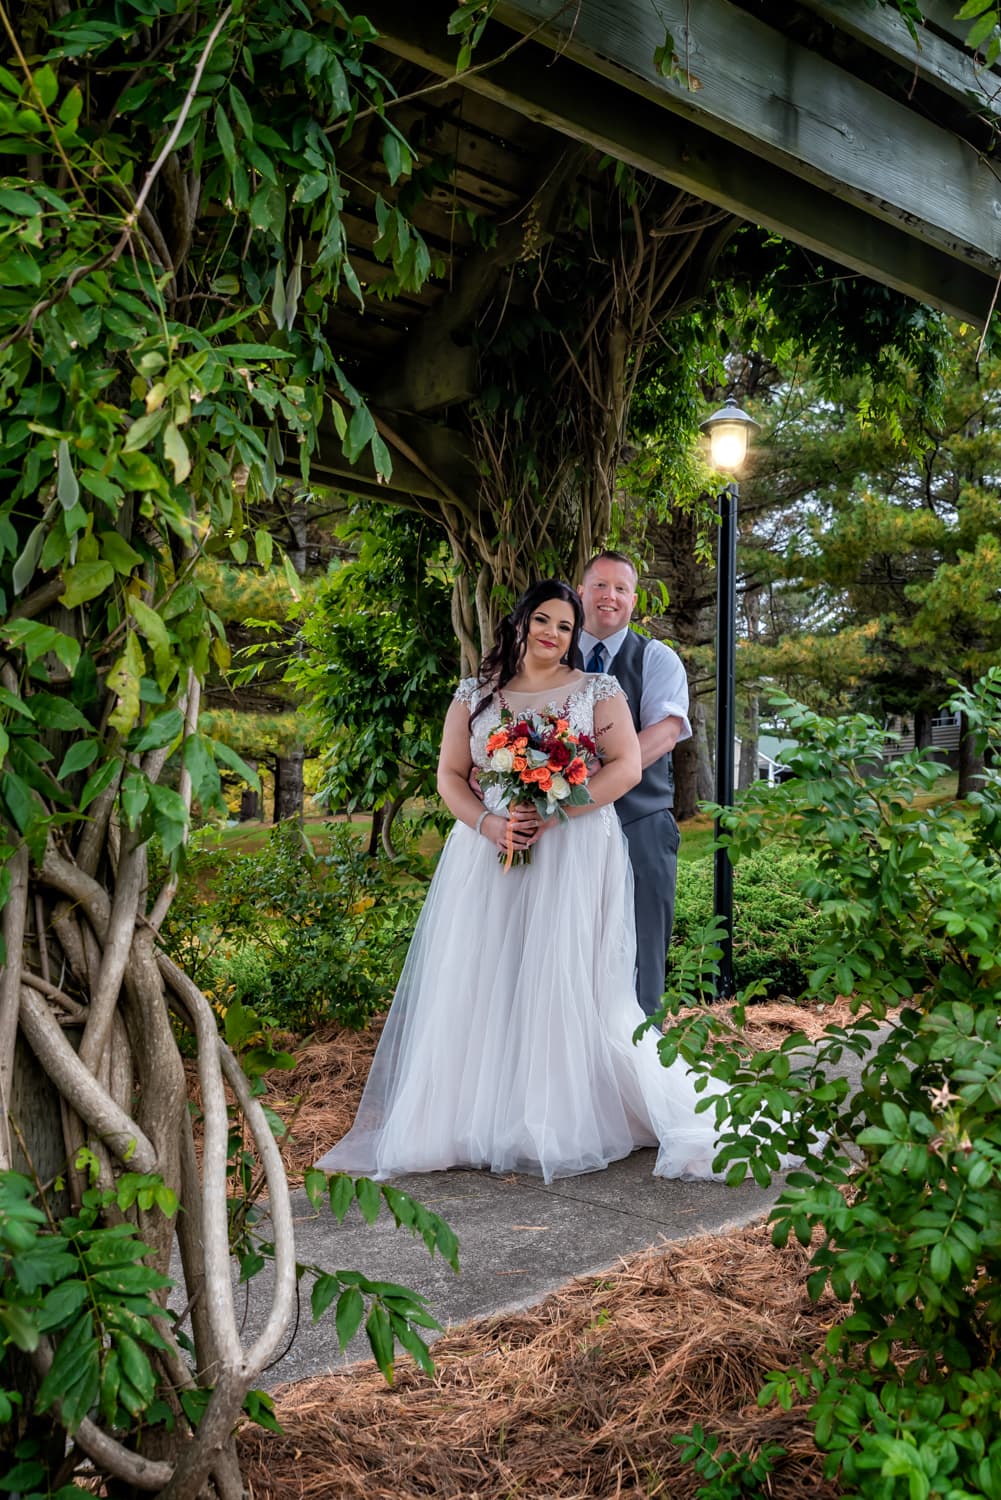 A bride and groom standing under an archway of veins at Digby Pines.